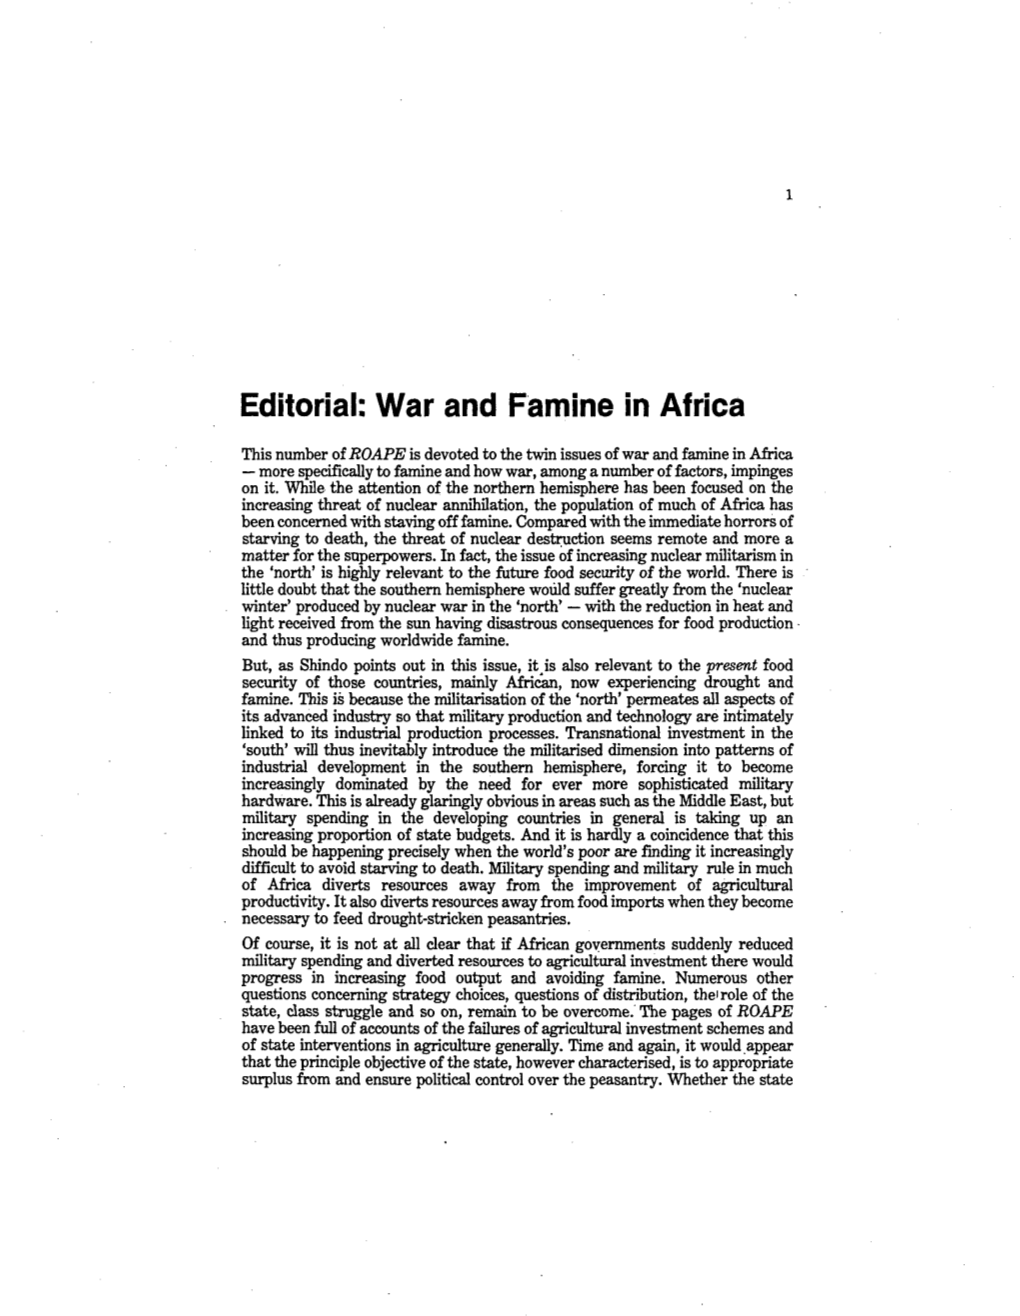 Editorial: War and Famine in Africa